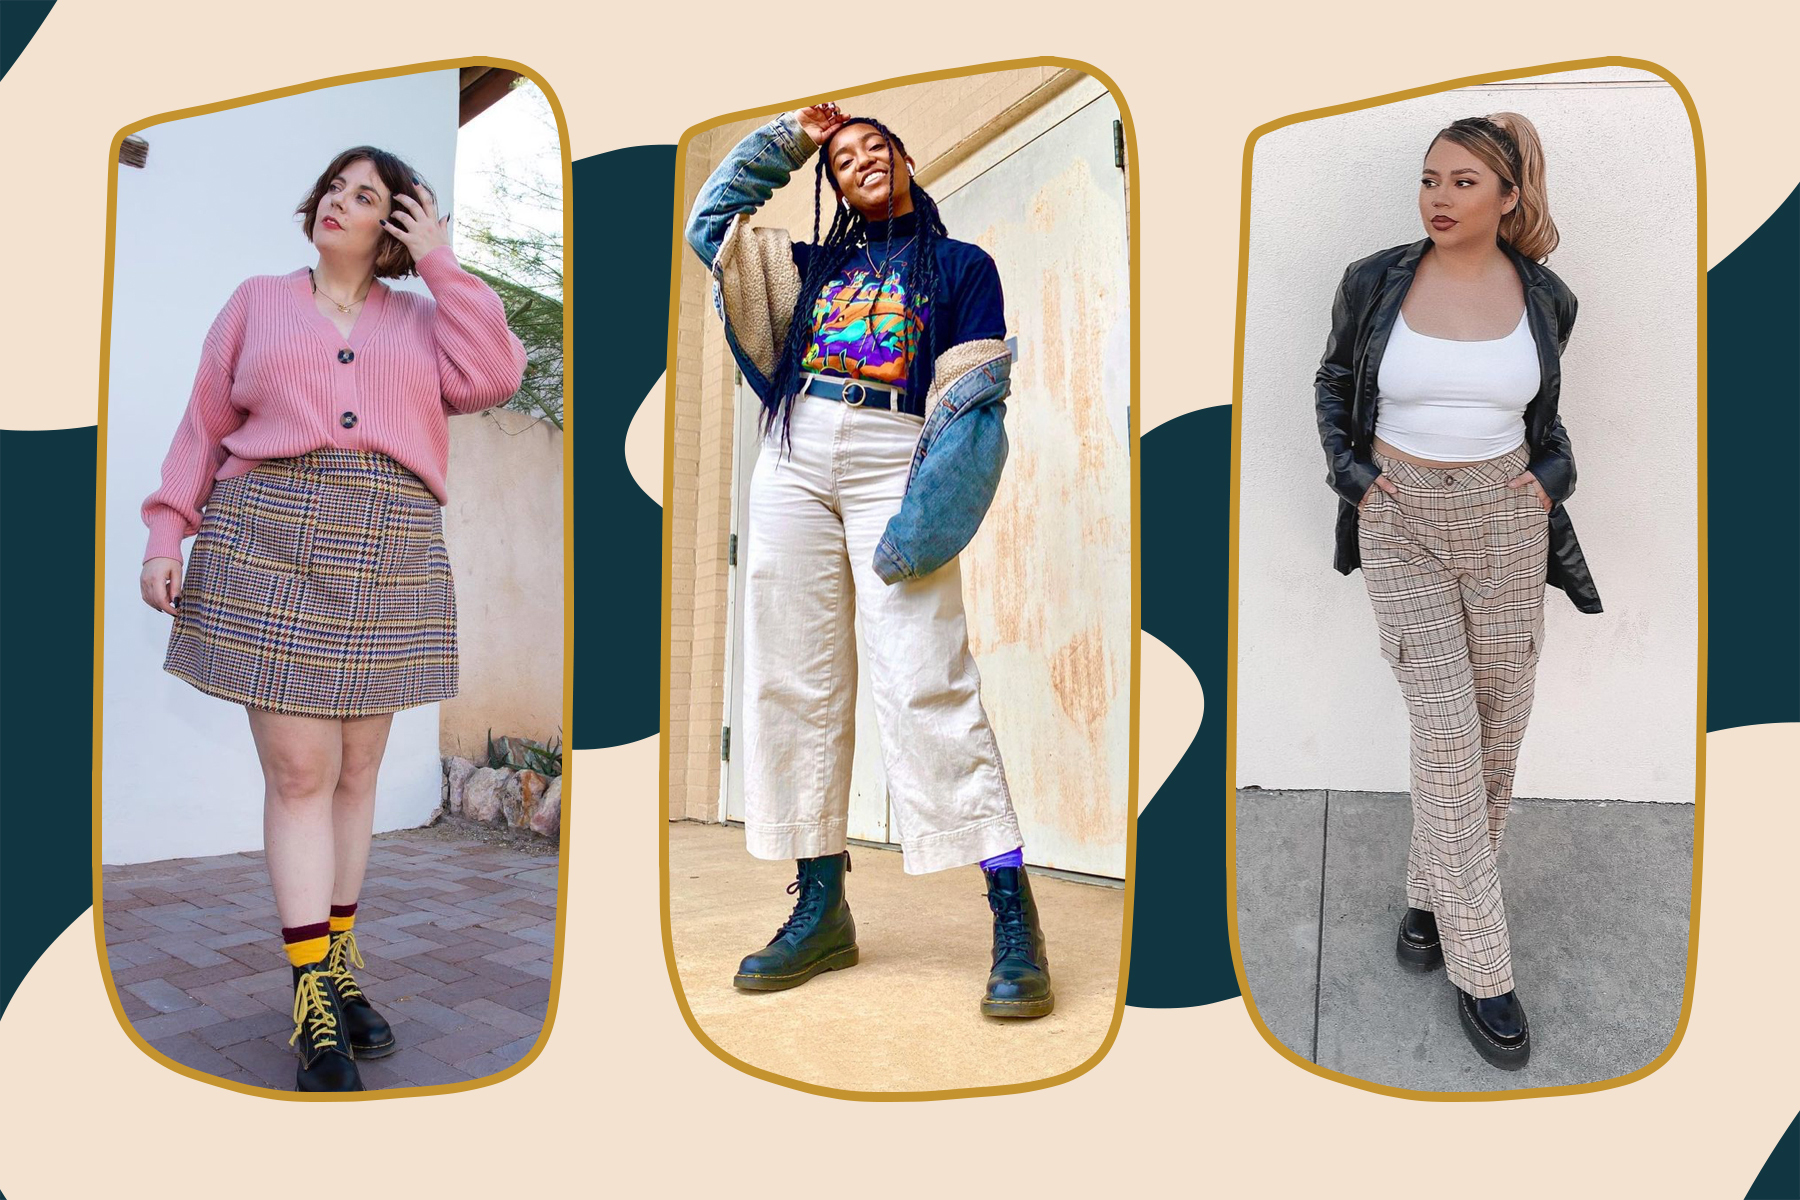 Doc Martens Outfits: How to Style the Shoes With Everything